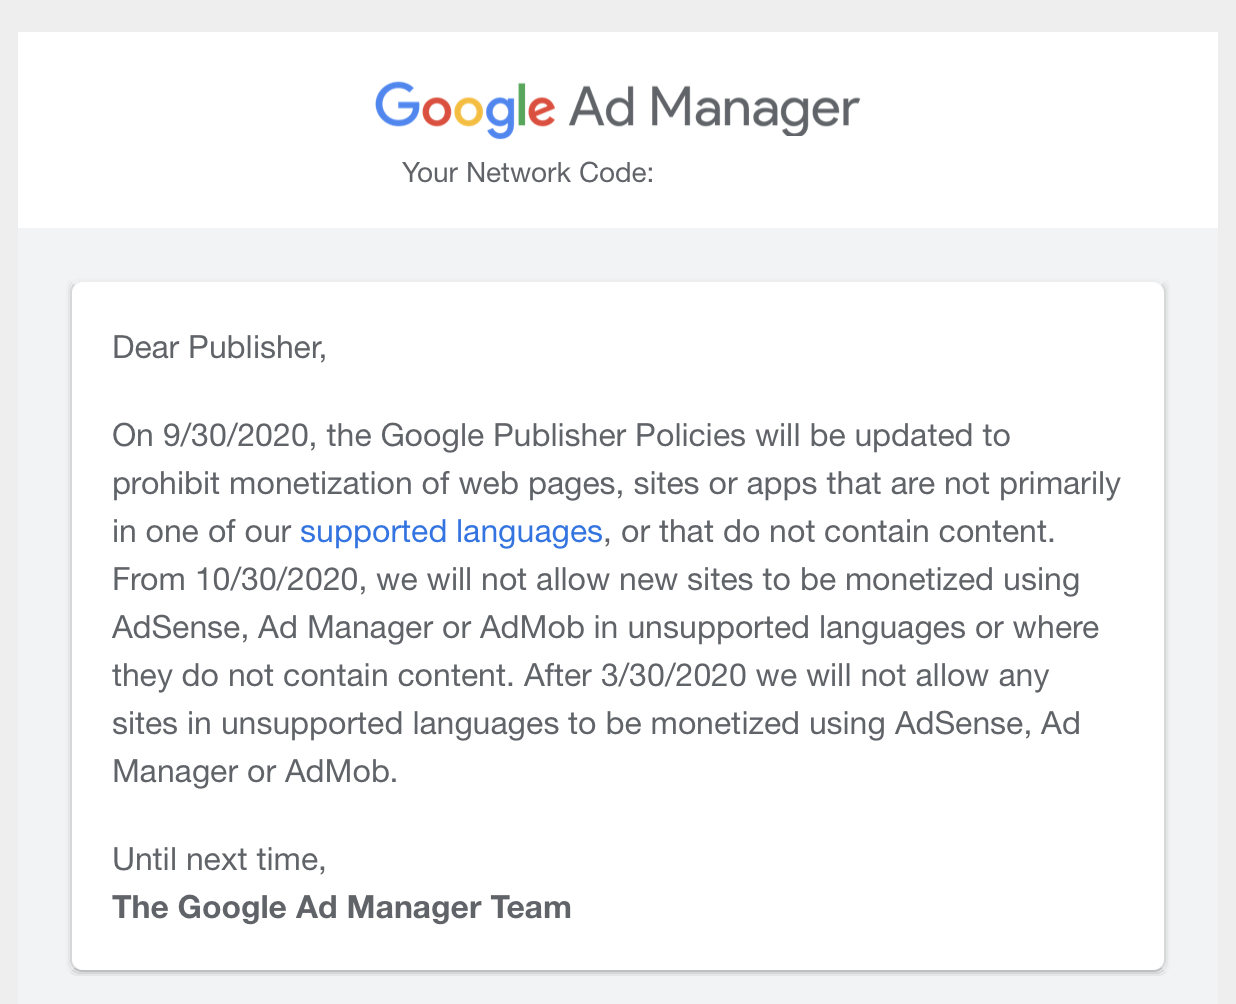 Google Ad Manager Publisher Policies Prohibit